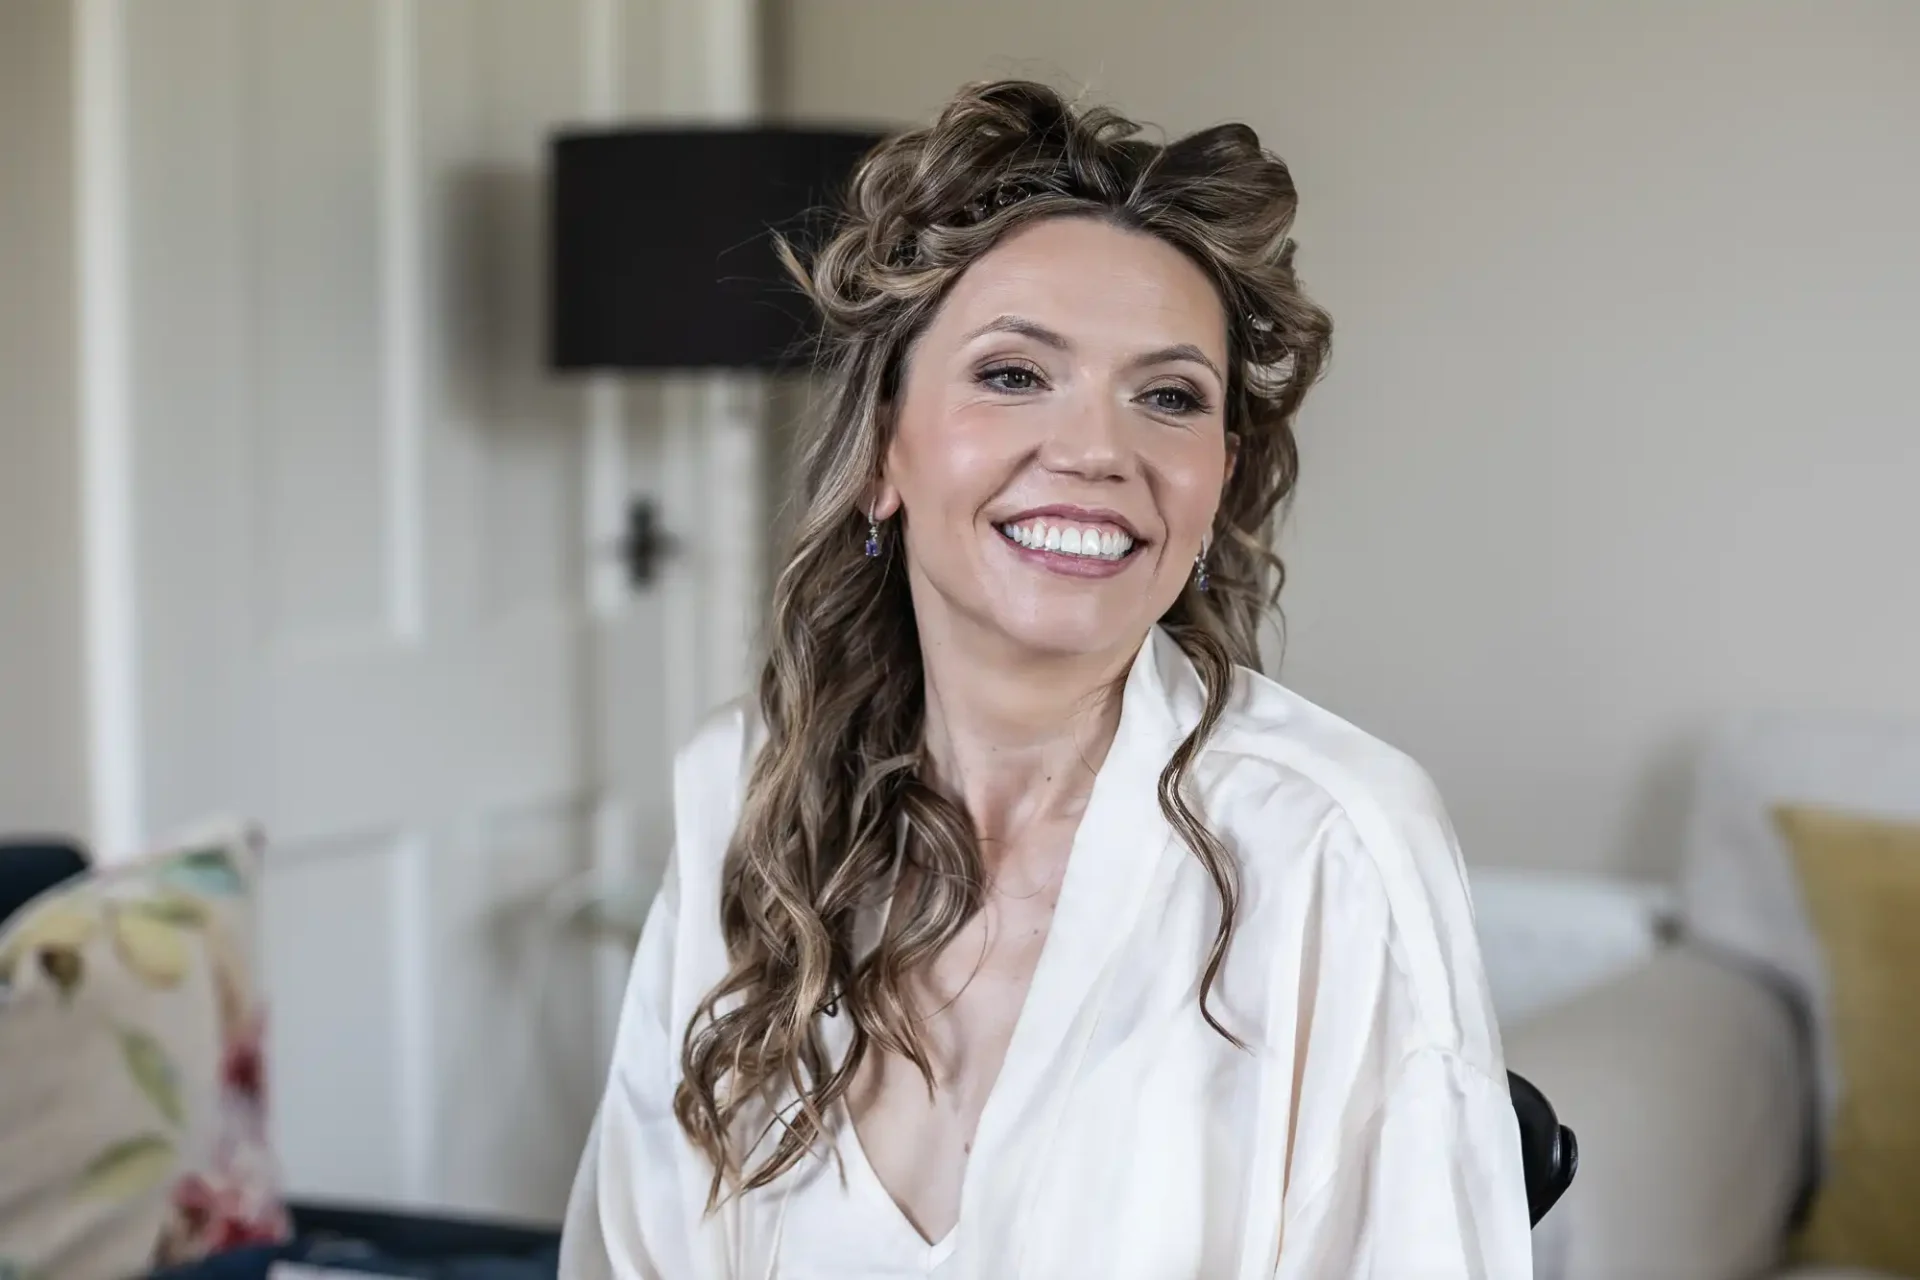 A woman with long, curly hair is smiling while sitting indoors. She is wearing a light-colored robe and appears relaxed.